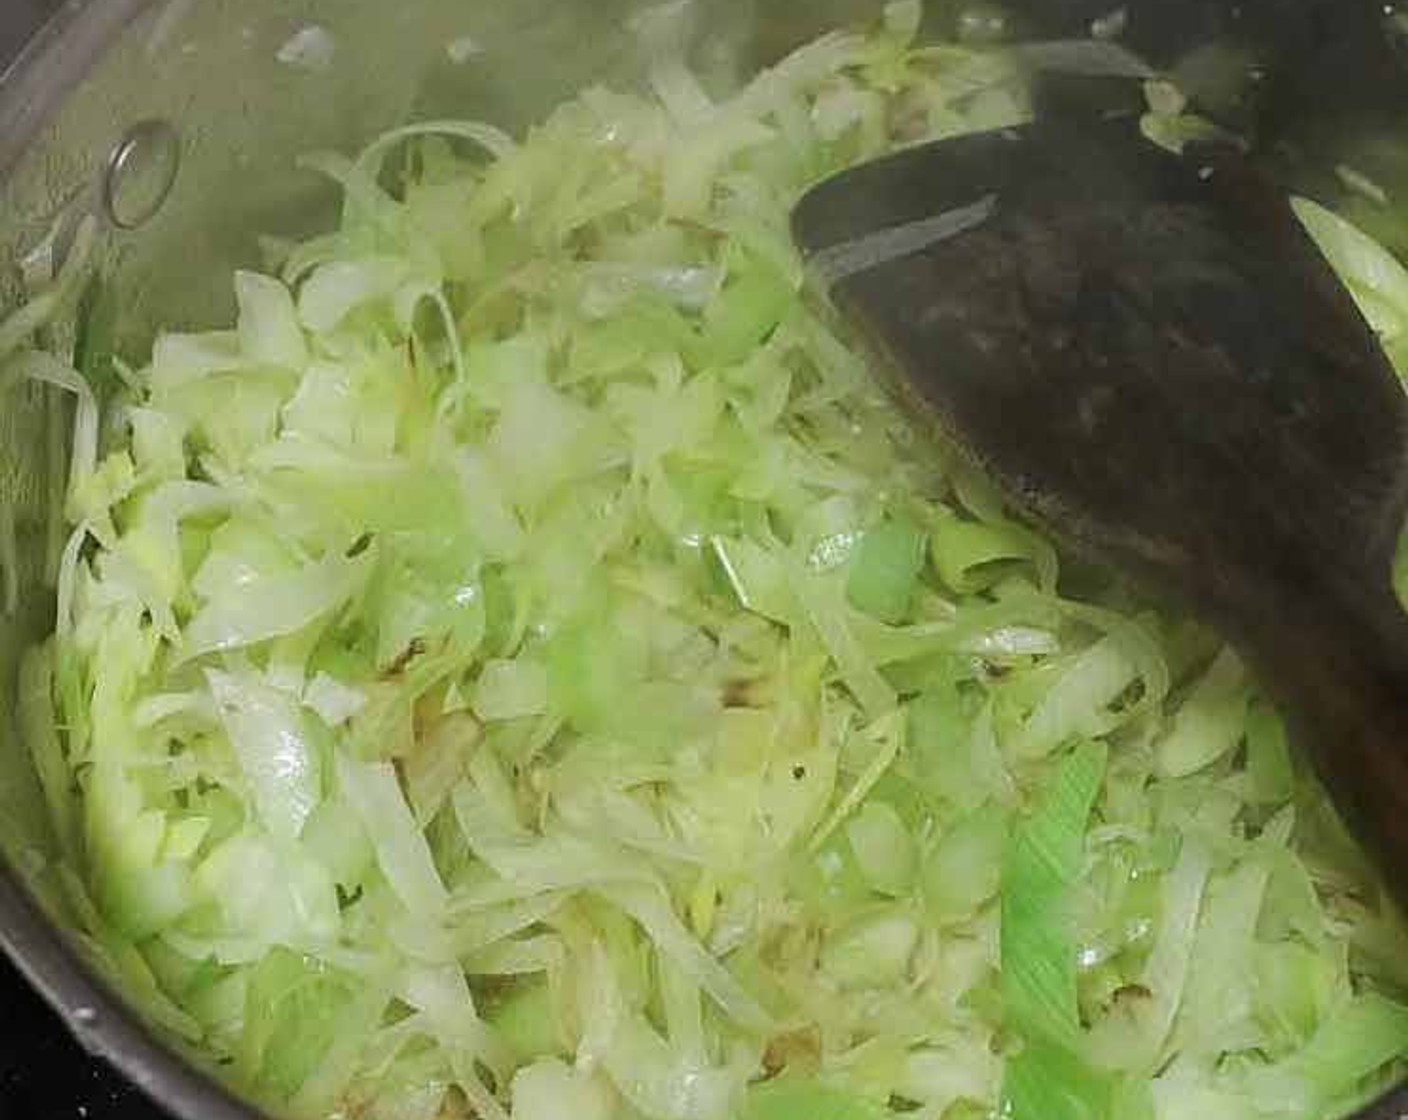 step 2 Add the Leeks (2 cups) and Celery (1 stalk) to the pot and stir-fry for 2-3 minutes.